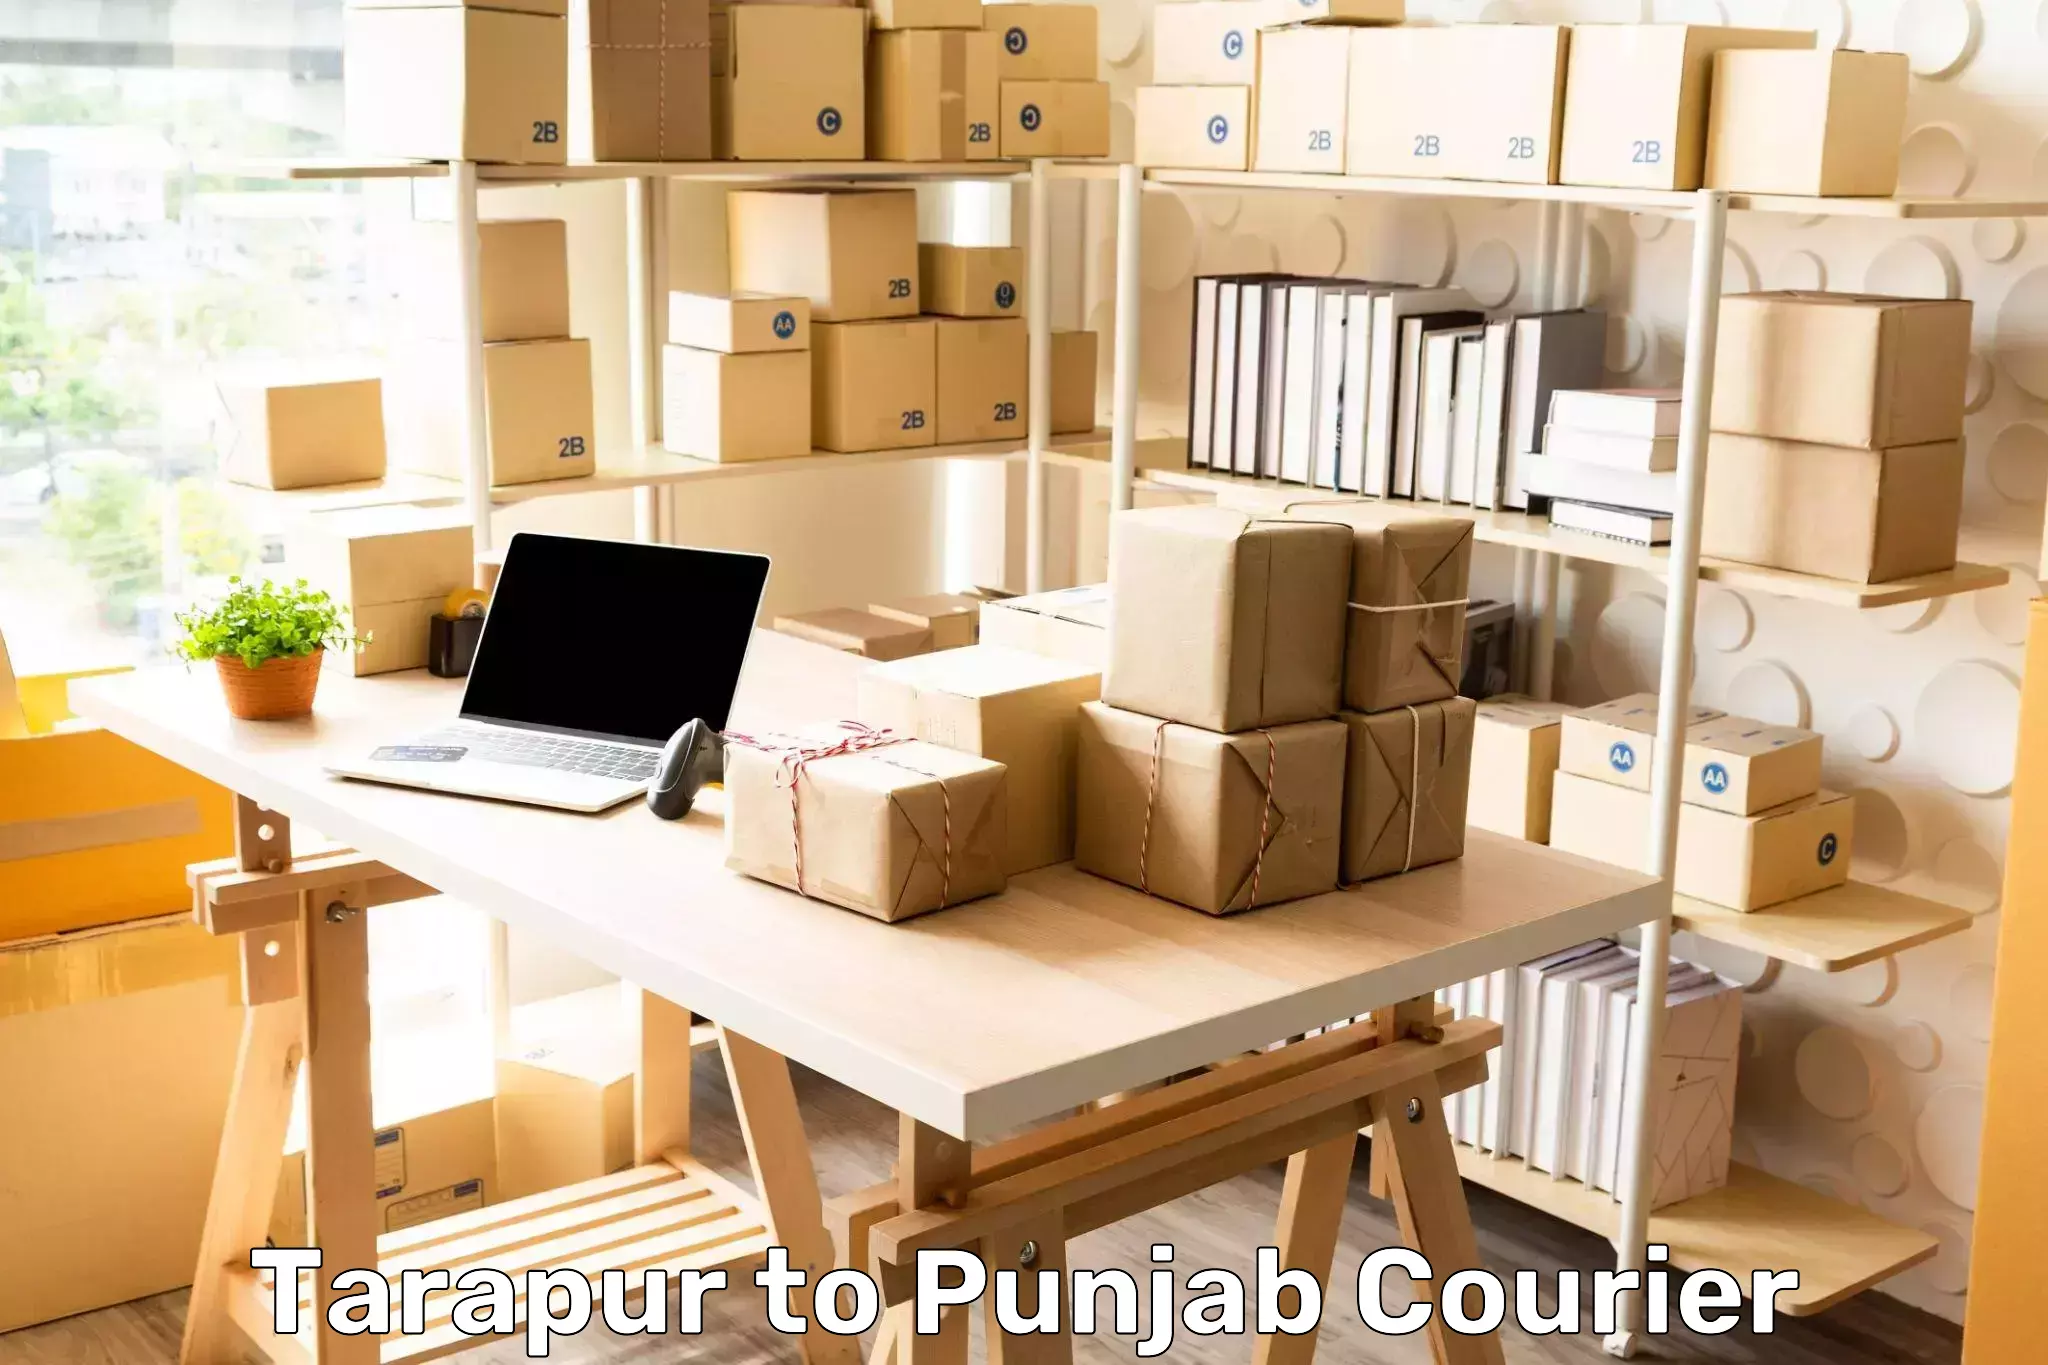 Express package delivery Tarapur to Patiala